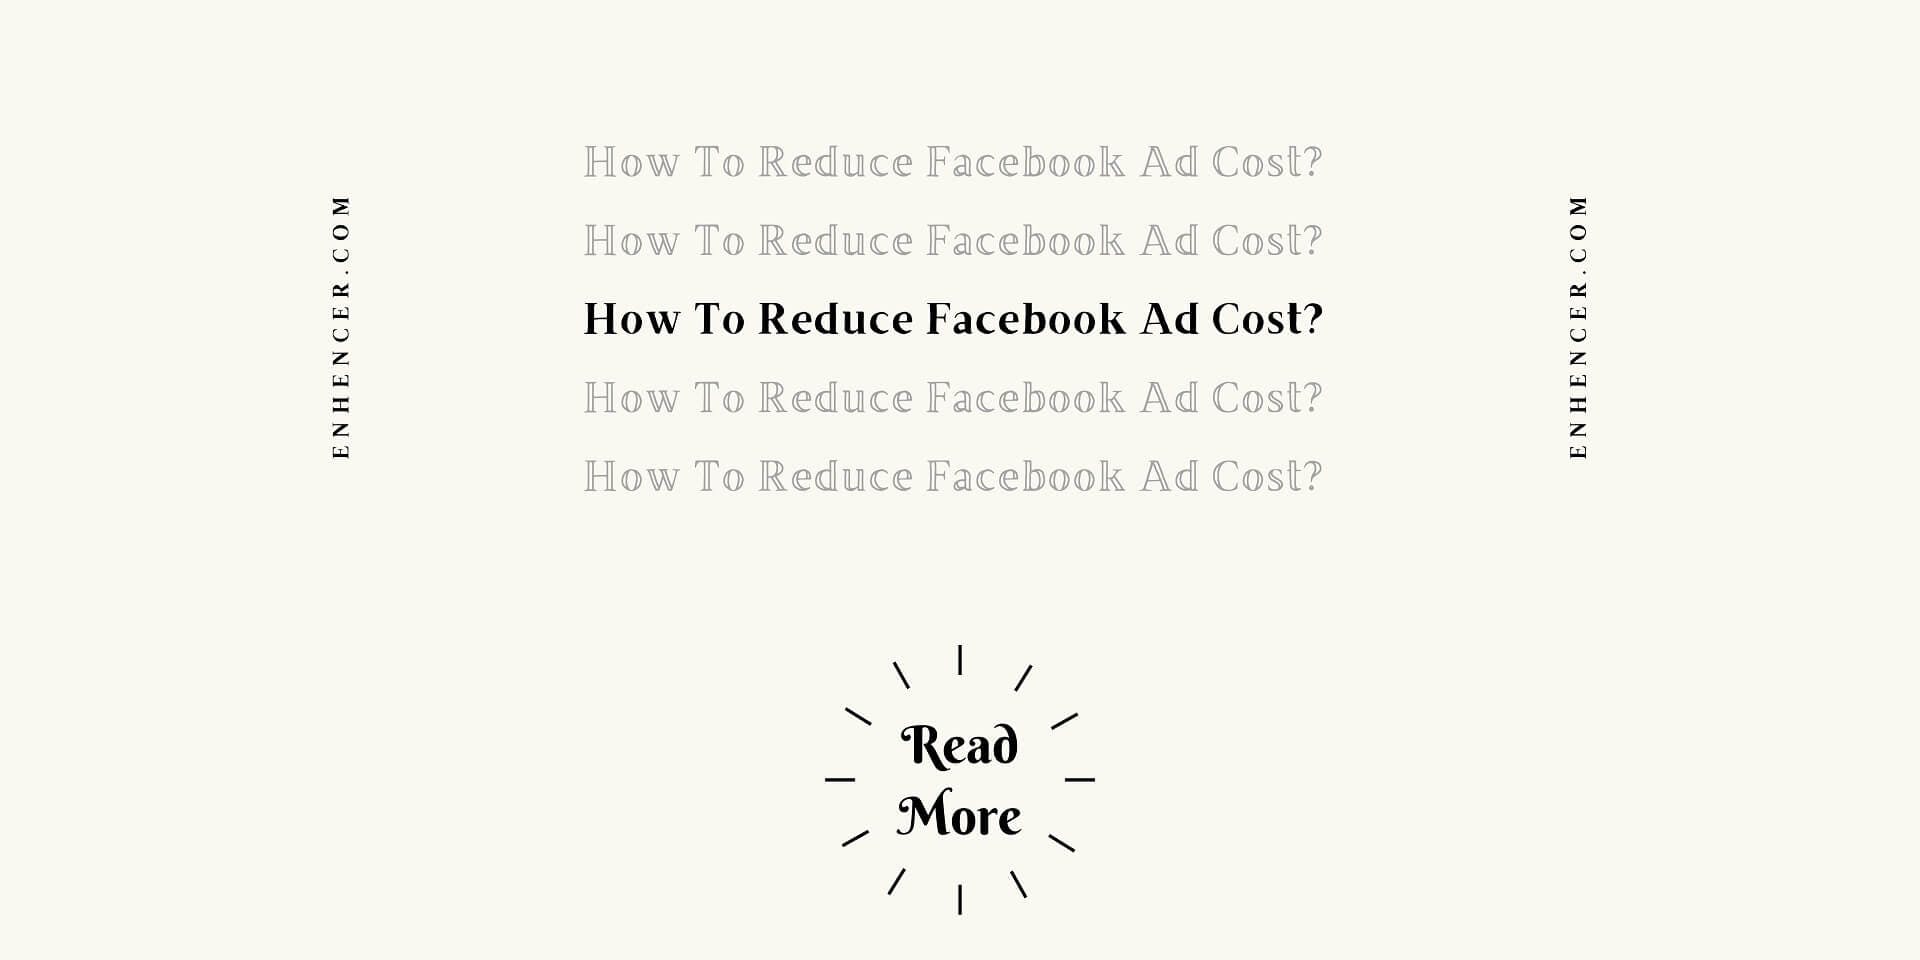 How To Reduce Facebook Ad Cost?